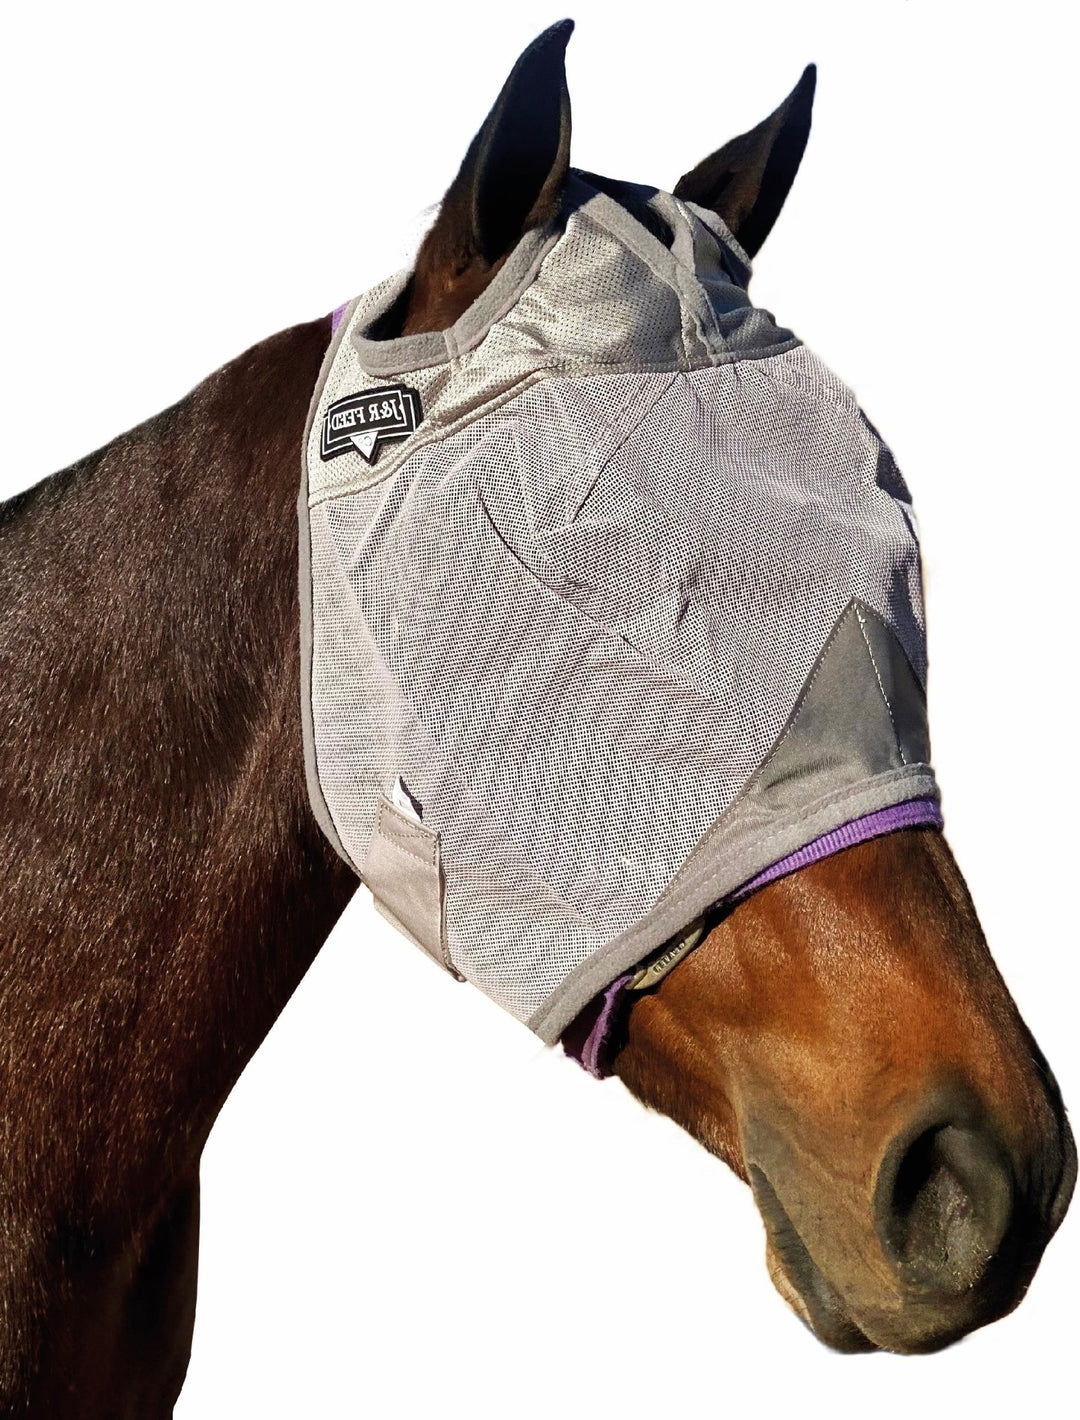 J&R HORSE FLY MASK LG - J&R Tack & Feed CO